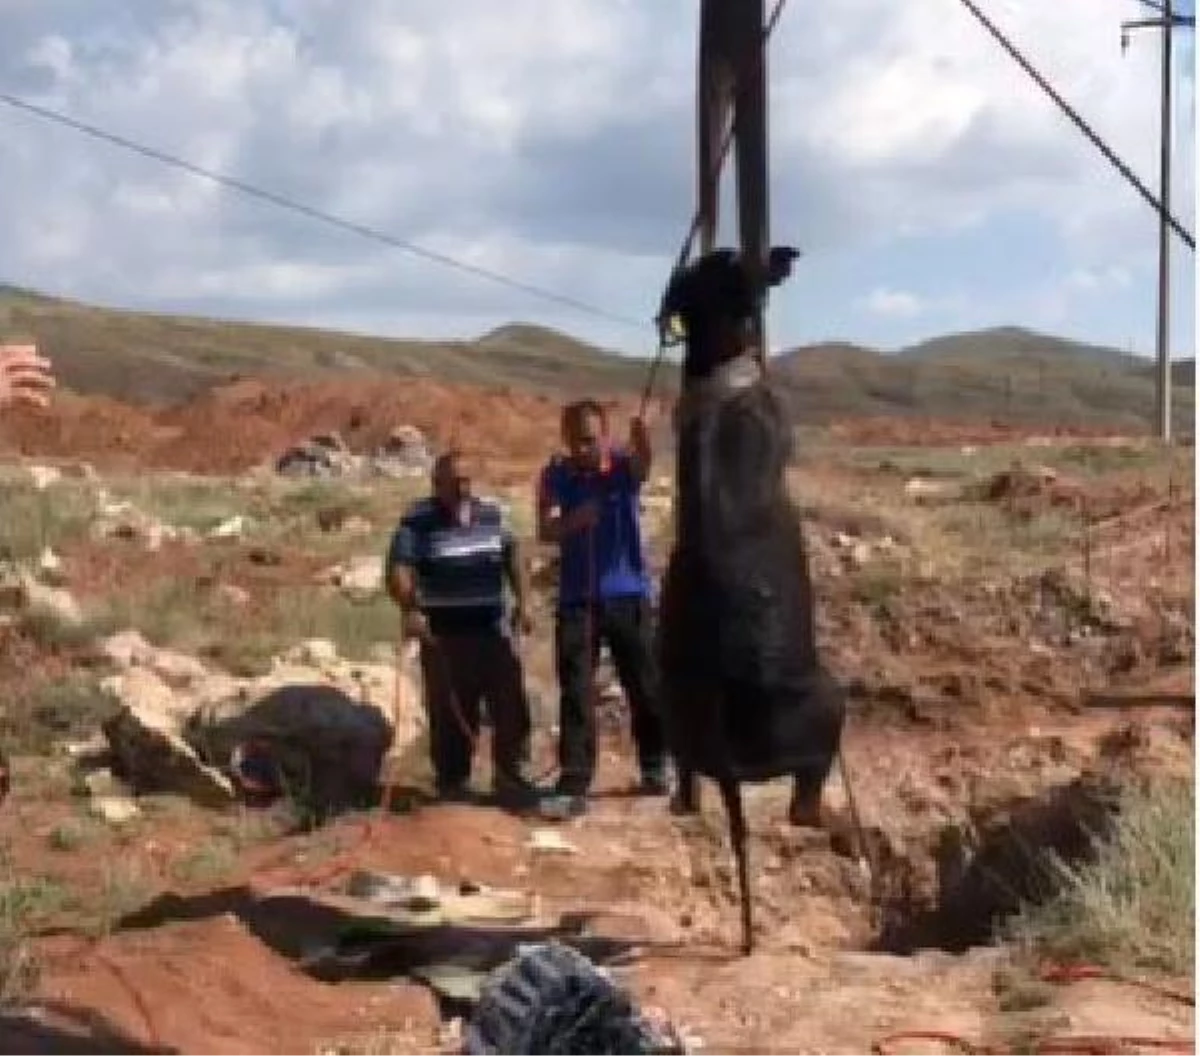 AFAD saved the buffalo that fell into a 12-meter well